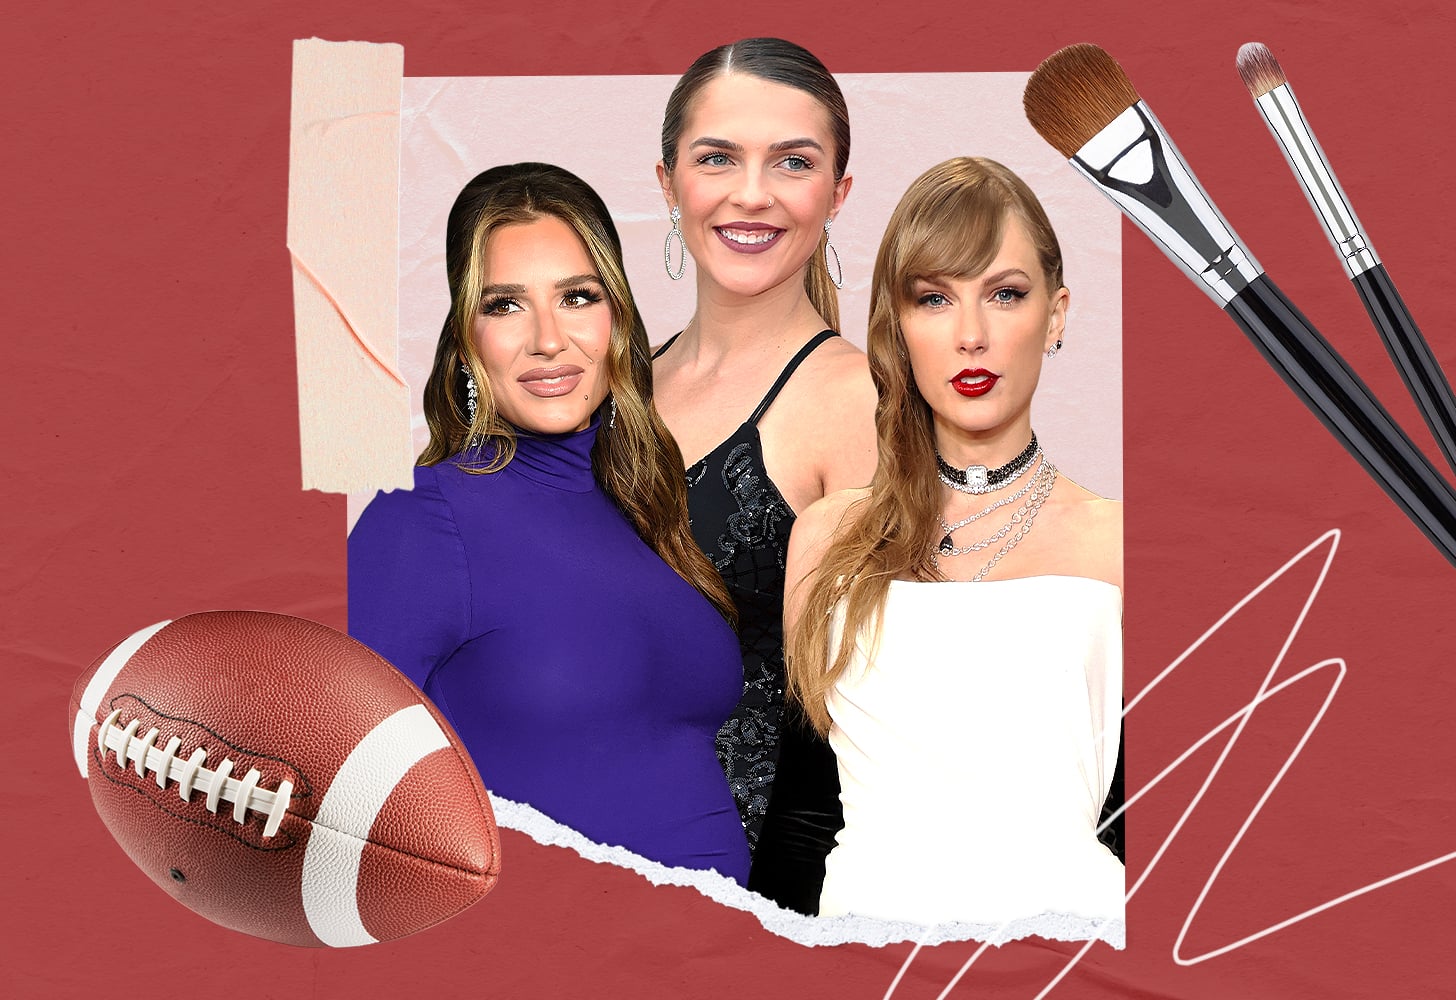 NFL WAGs makeup artist Allison Kaye shares her behind-the-scenes beauty secrets on game day.